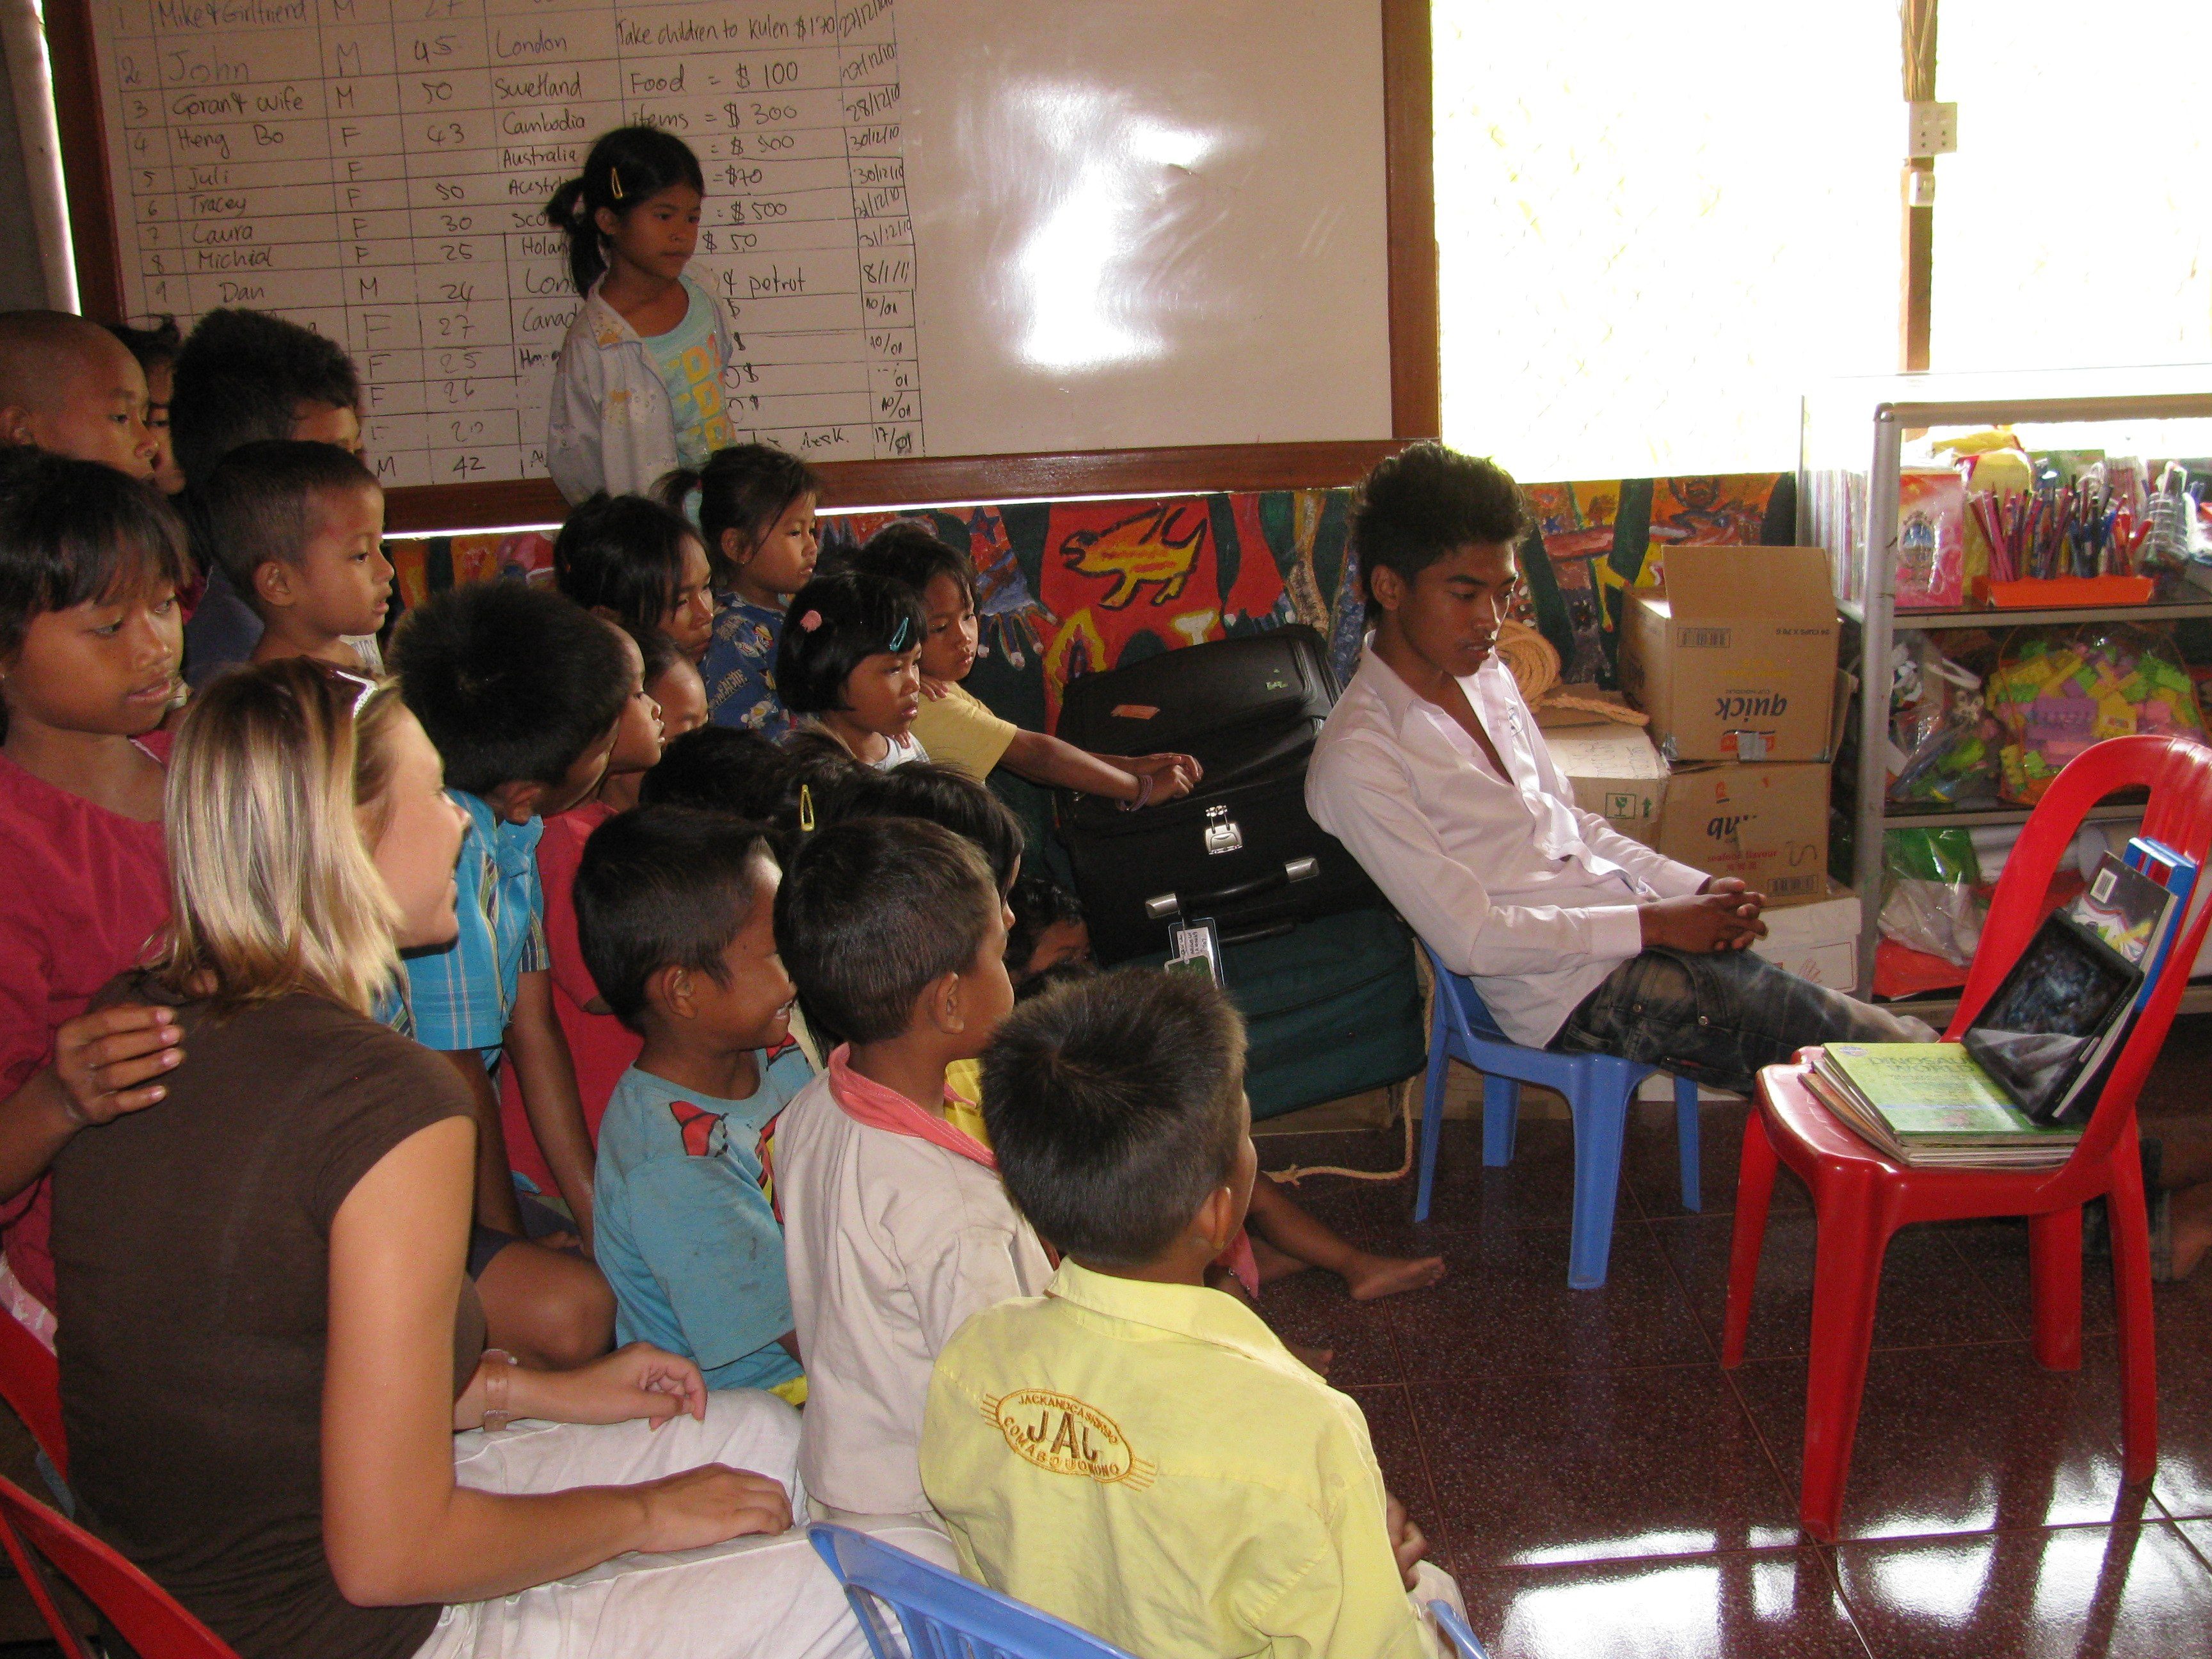 YOU could volunteer in this Siem Reap classroom, too!